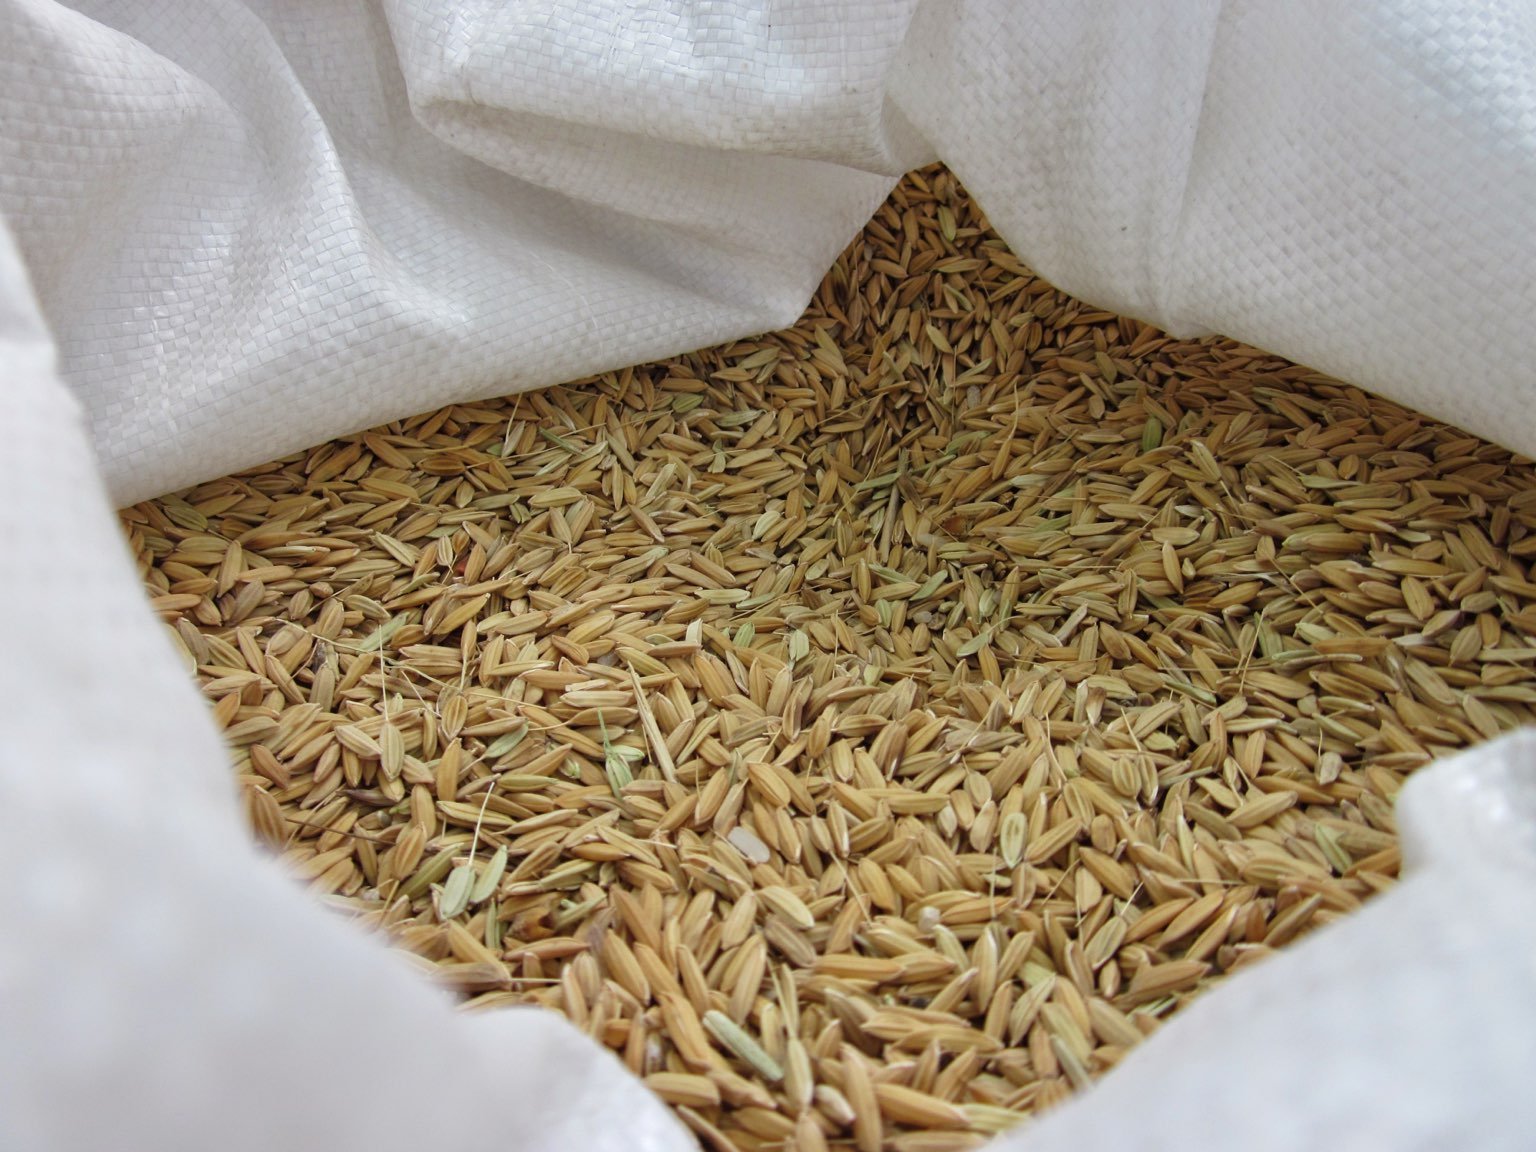 A view into a white sack of unprocessed rice.